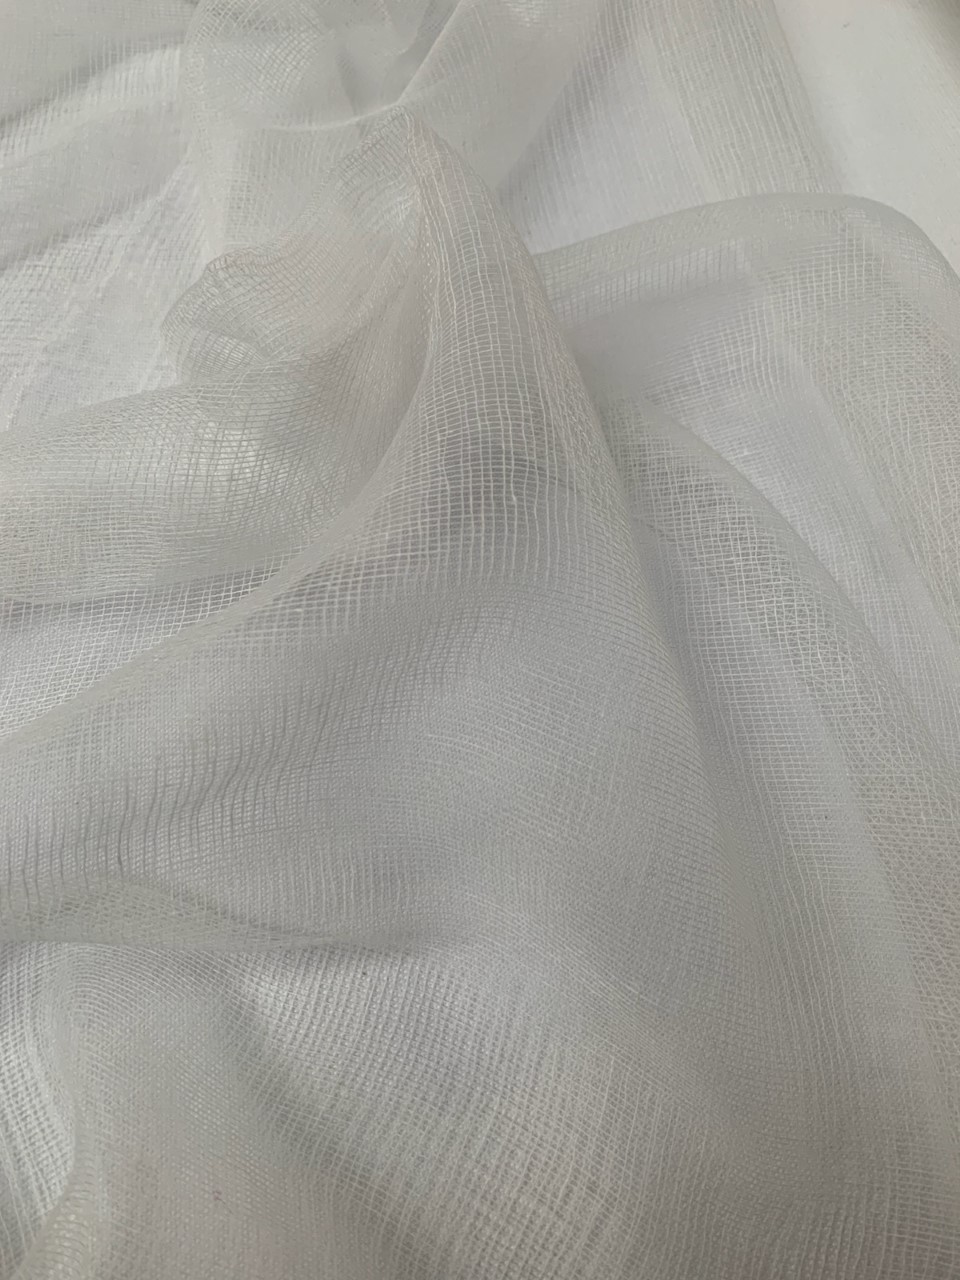 30" Wide Grade 10 White Cheesecloth - 1000 Yard Roll